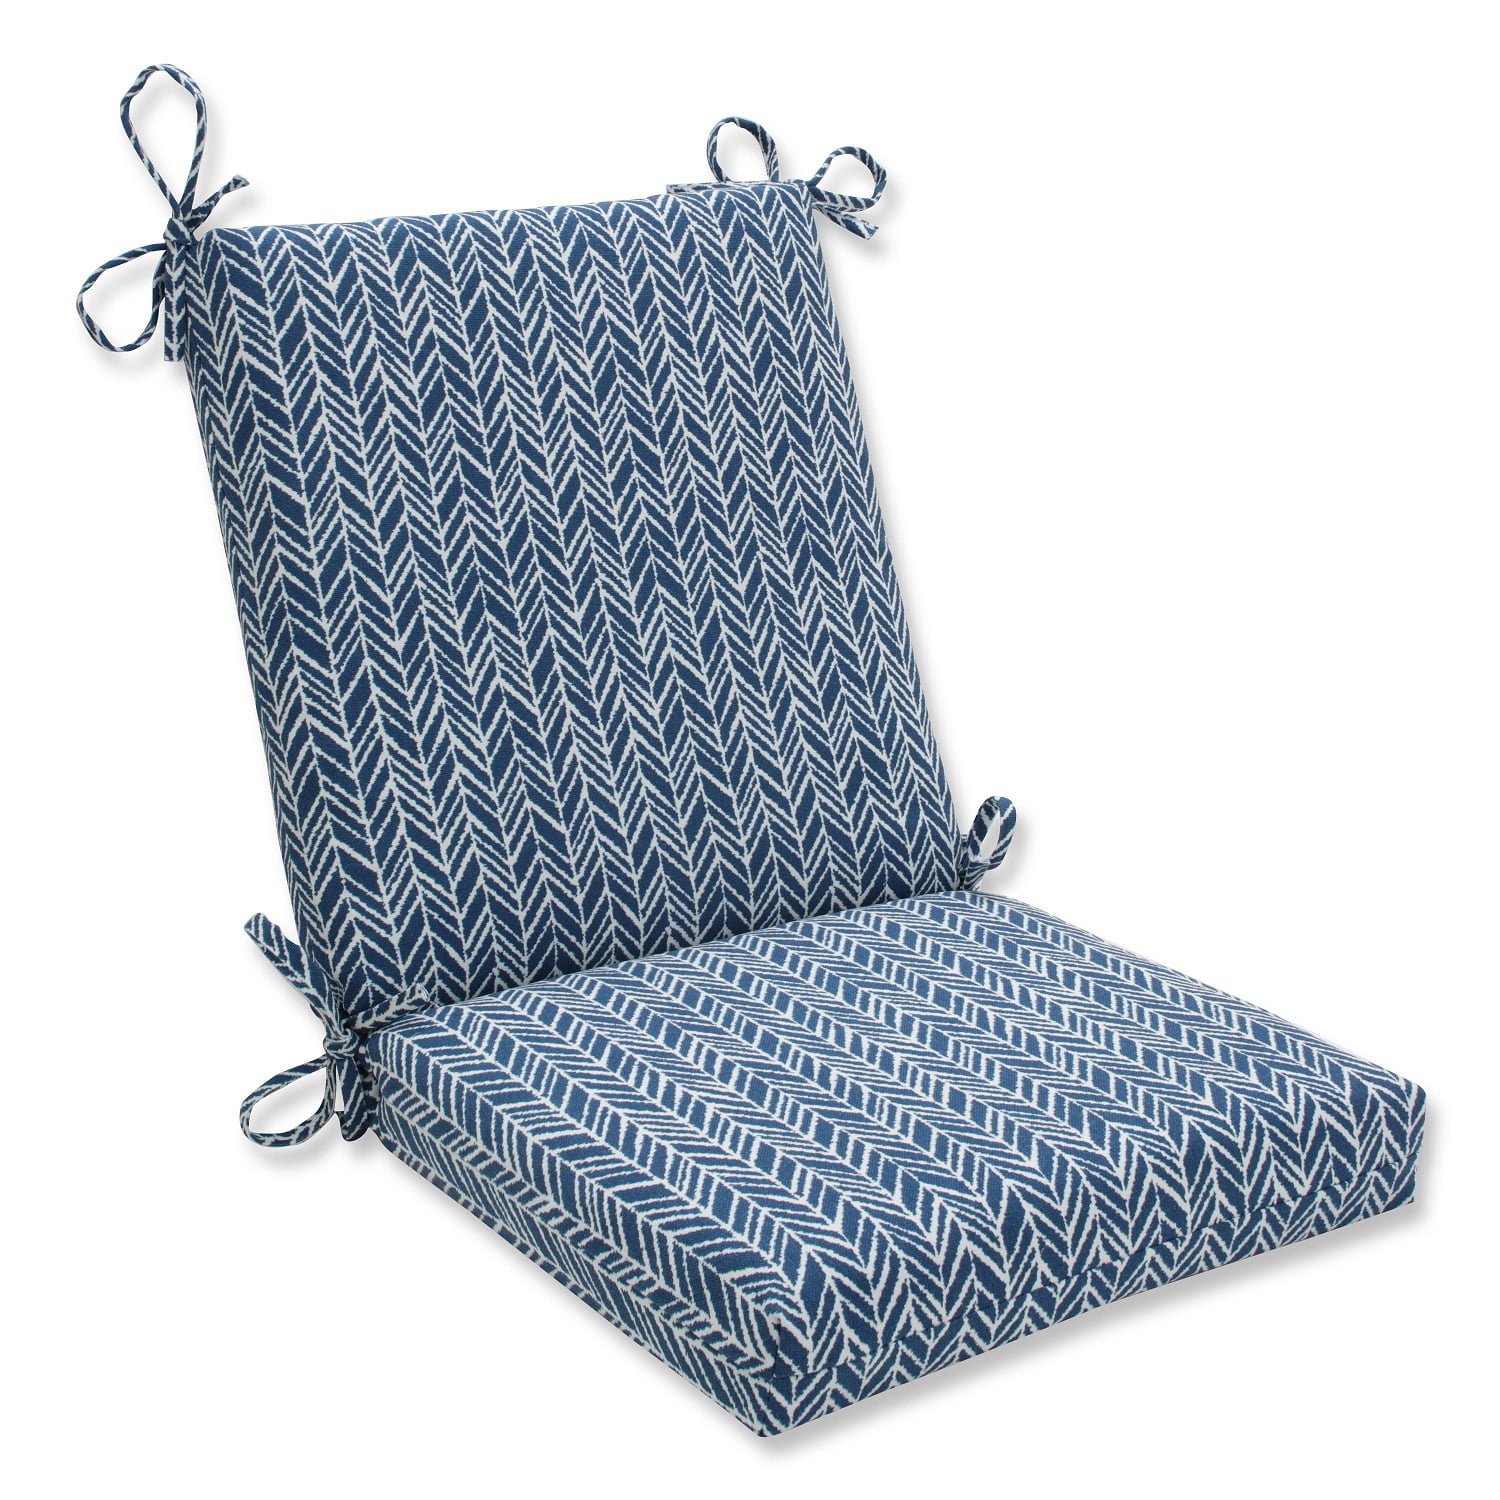 36.5” Blue and White Outdoor Patio Chair Cushion with Ties